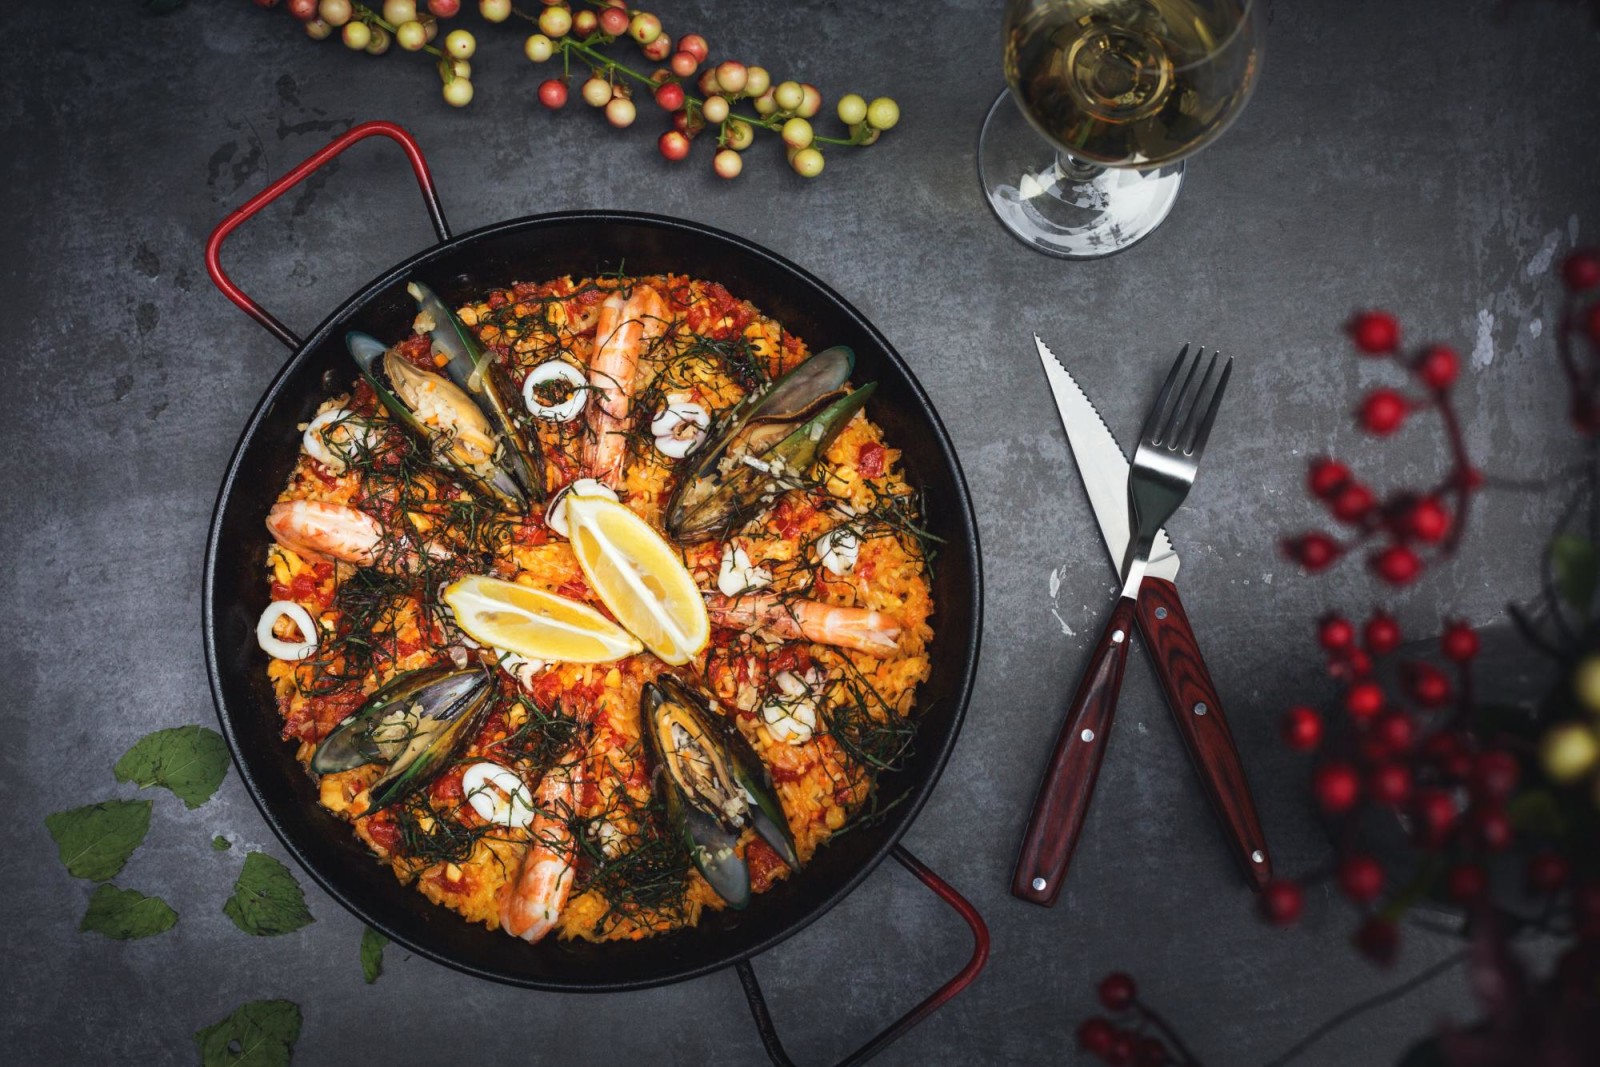 Hot paella with mussels, shrimp and squid in pan with utensils and drink on the side on charcoal table.